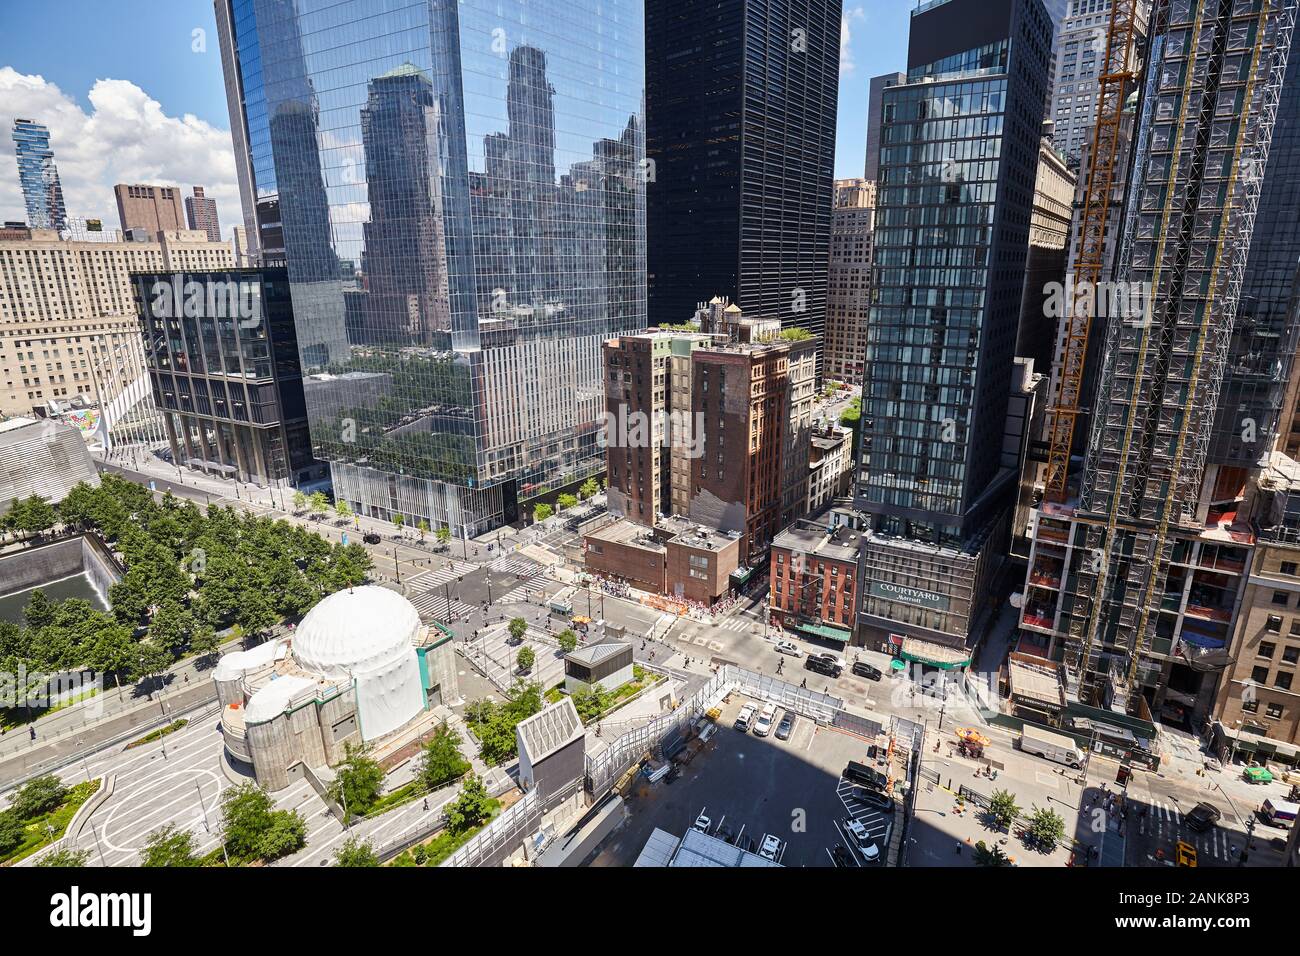 New York, USA - July 05, 2018: Bustling New York City modern downtown seen from above. Stock Photo